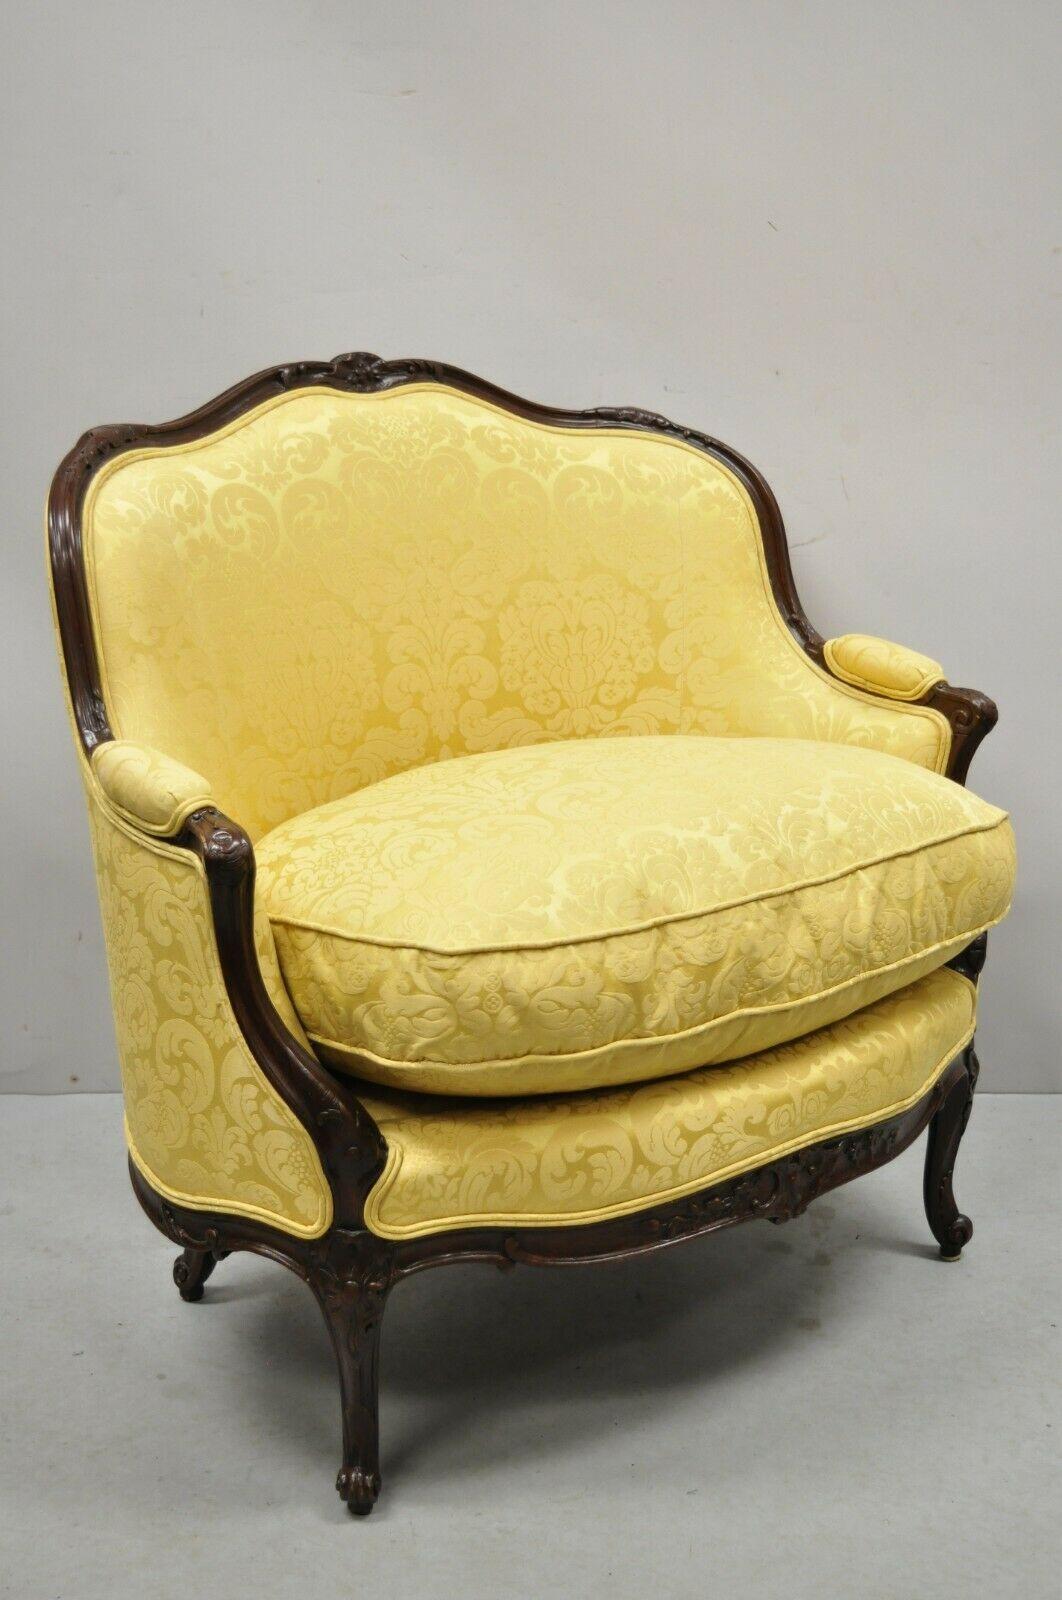 French Louis XV Style Gold Upholstered Wide Seat Lounge Chair Settee Bergere For Sale 7